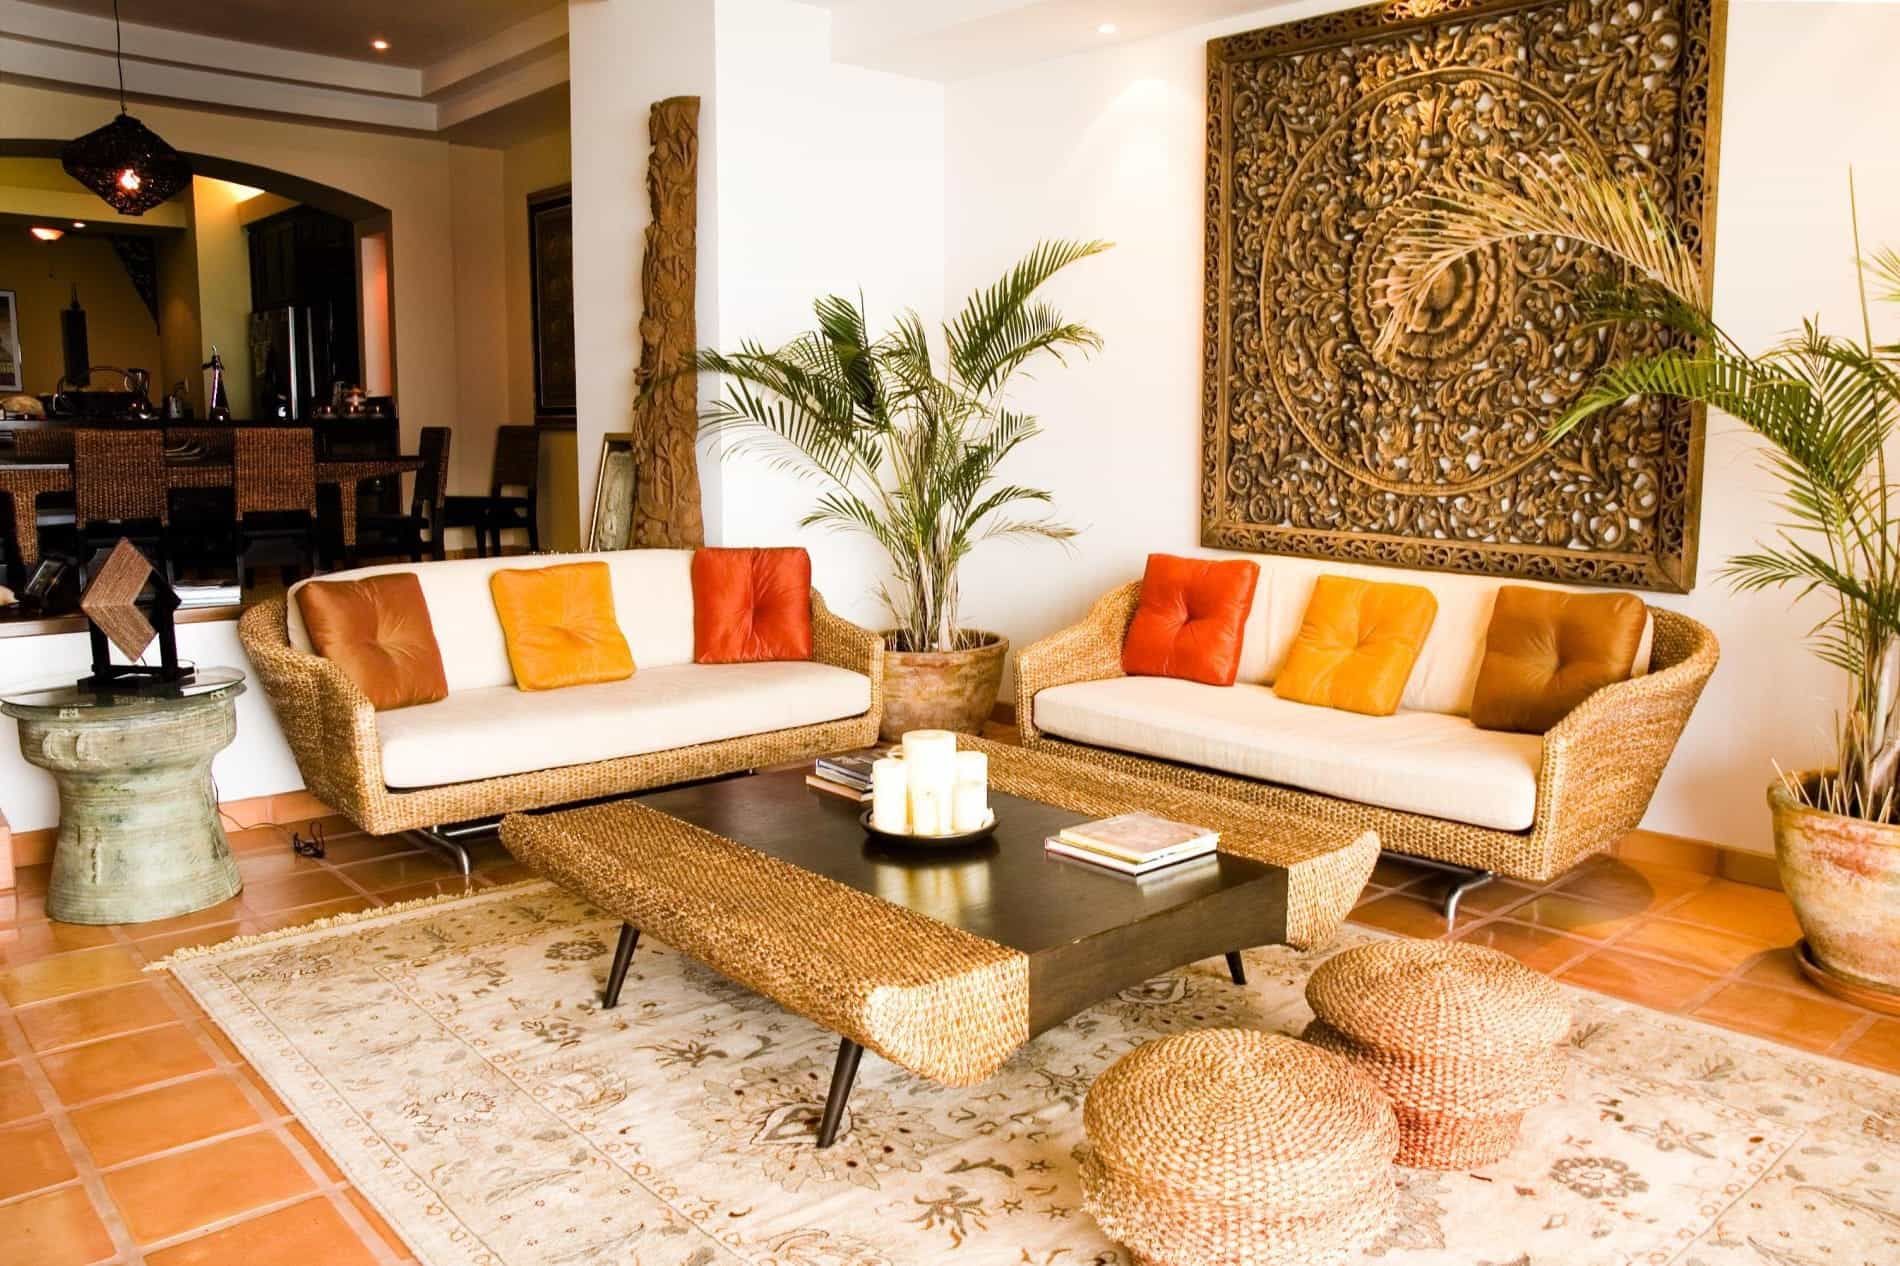 How To Start A Home Decor Business In India